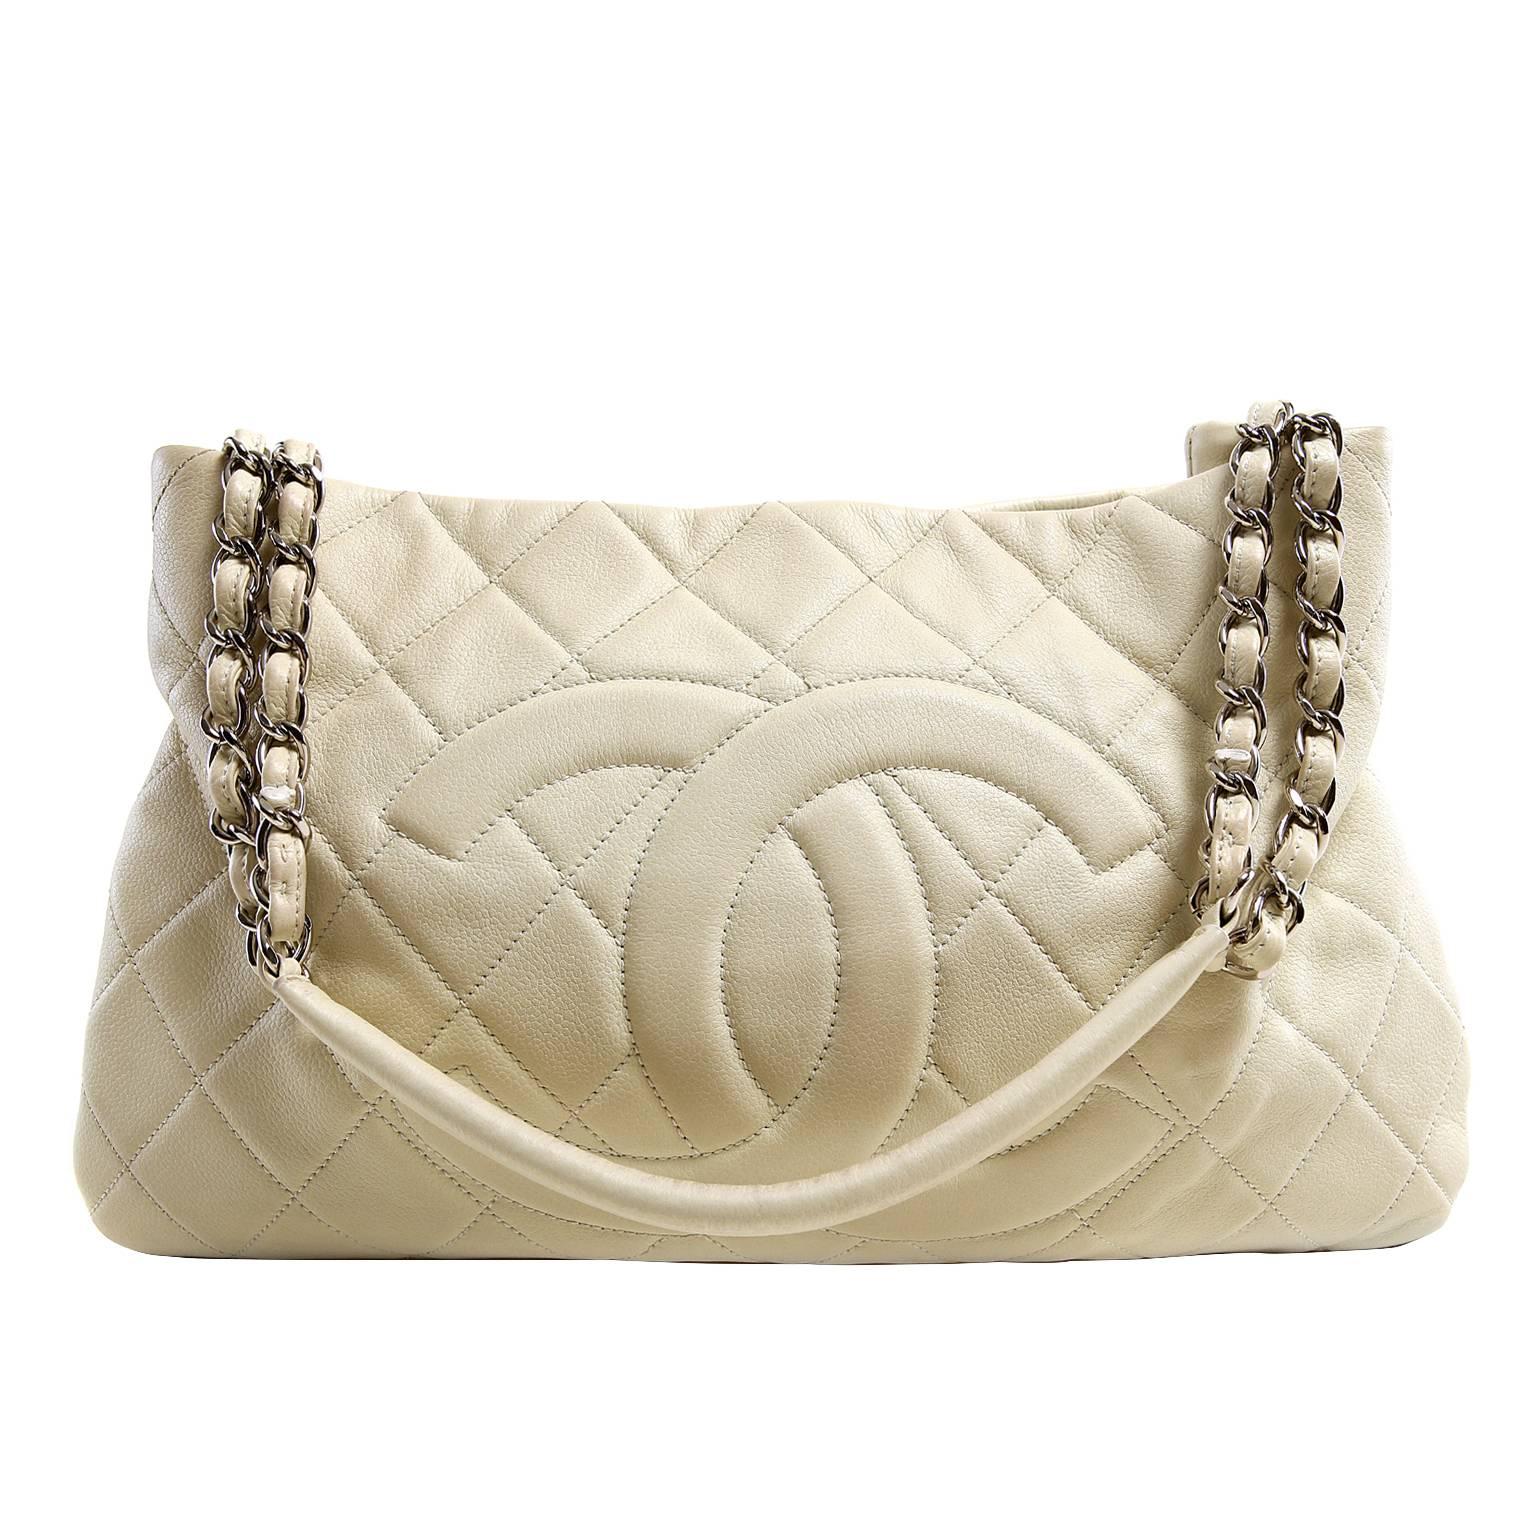 Chanel Ivory Leather Zip Around Expandable Tote Shoulder Bag